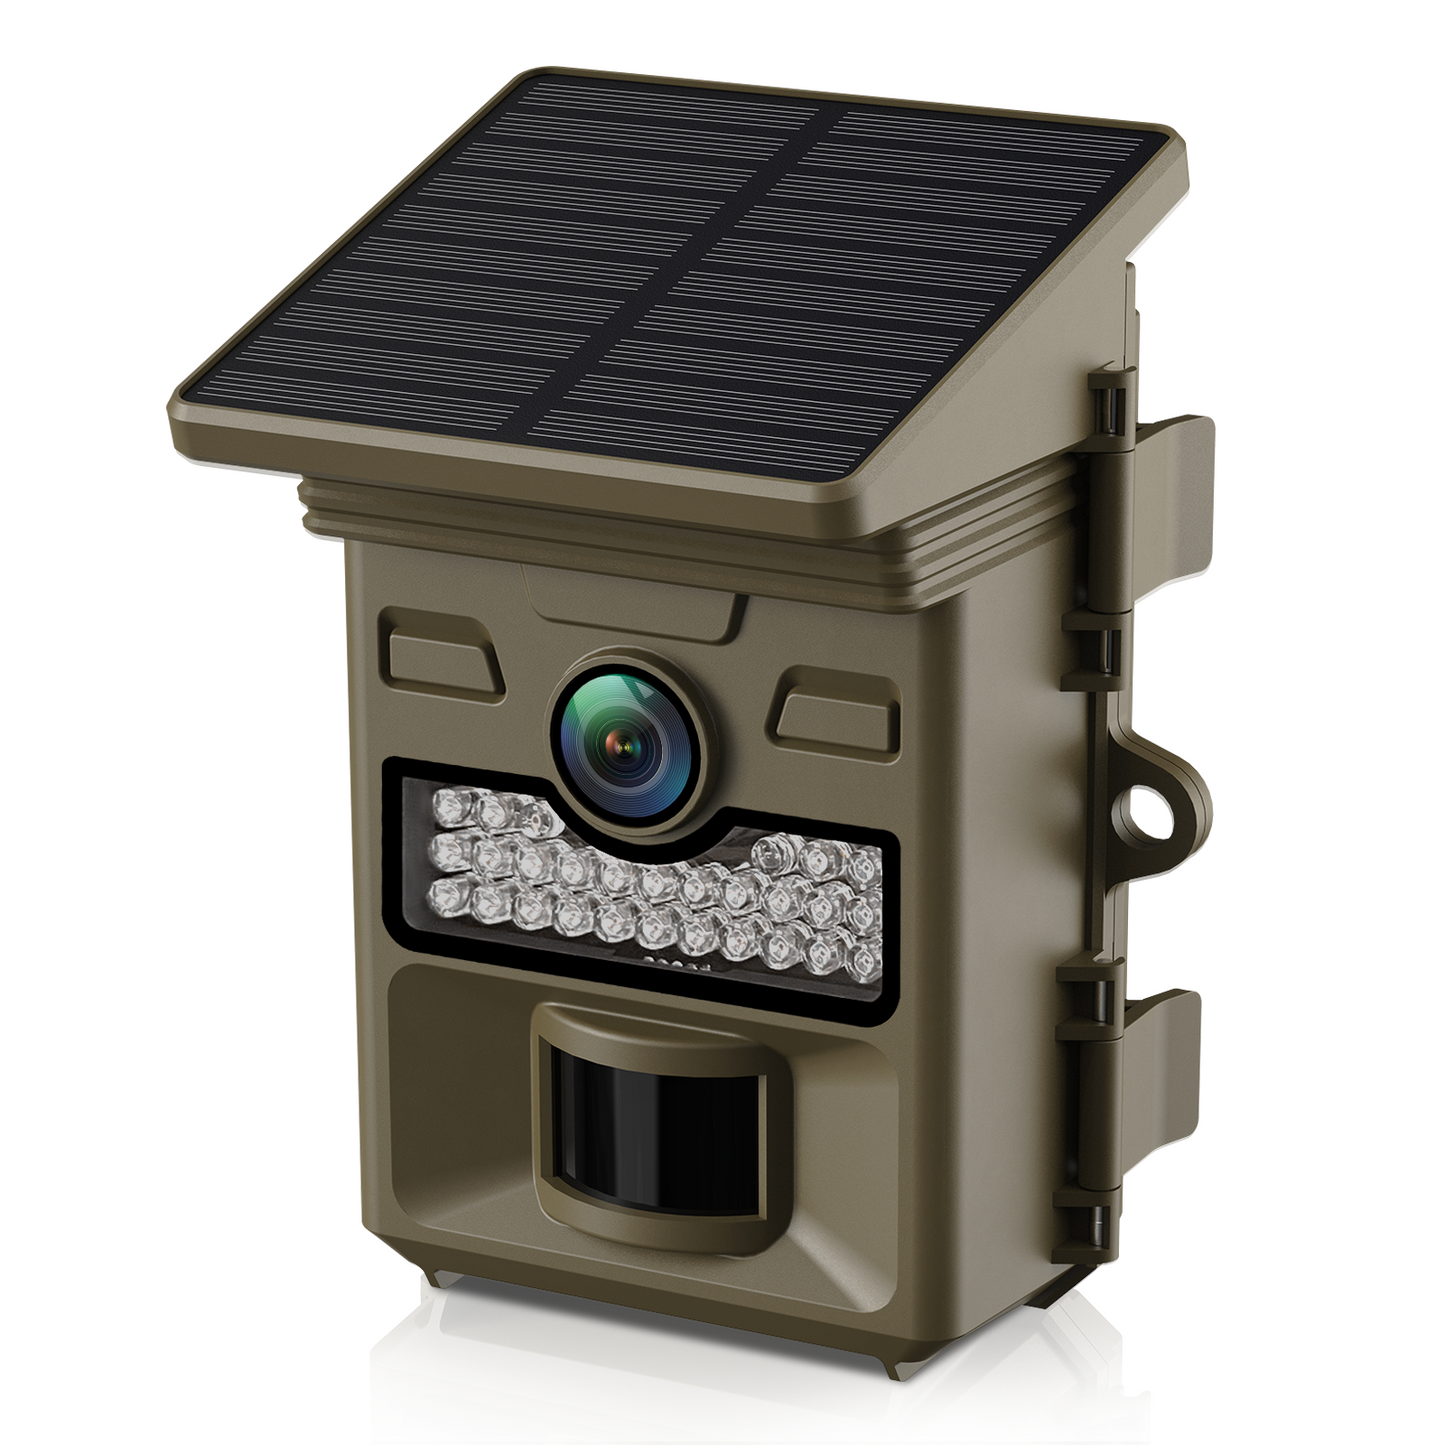 CAMPARK Solar Powered Trail Camera 32MP 1080P Hunting Game Camera with Night Vision 4400mAh Built-in Battery 0.1s Trigger Motion Activated IP66 Waterproof 2.0" LCD for Wildlife Monitoring (NO WiFi)